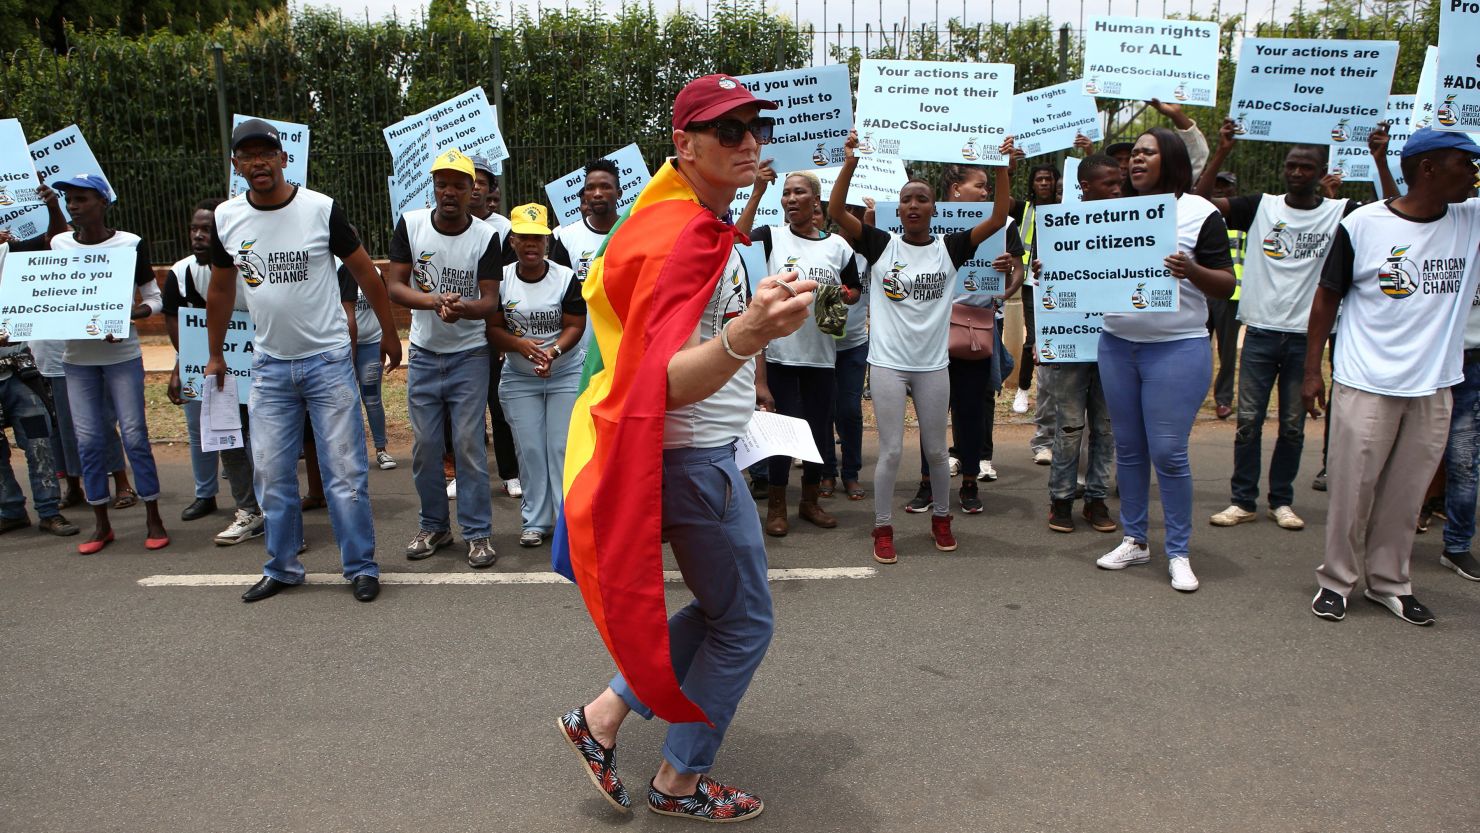 South African Members of the Lesbian, Gay, Bisexual, Transgender, Queer or Questioning and Intersex community (LGBTQI) protest outside the Tanzania High Commission on November 26, 2018 in Pretoria.